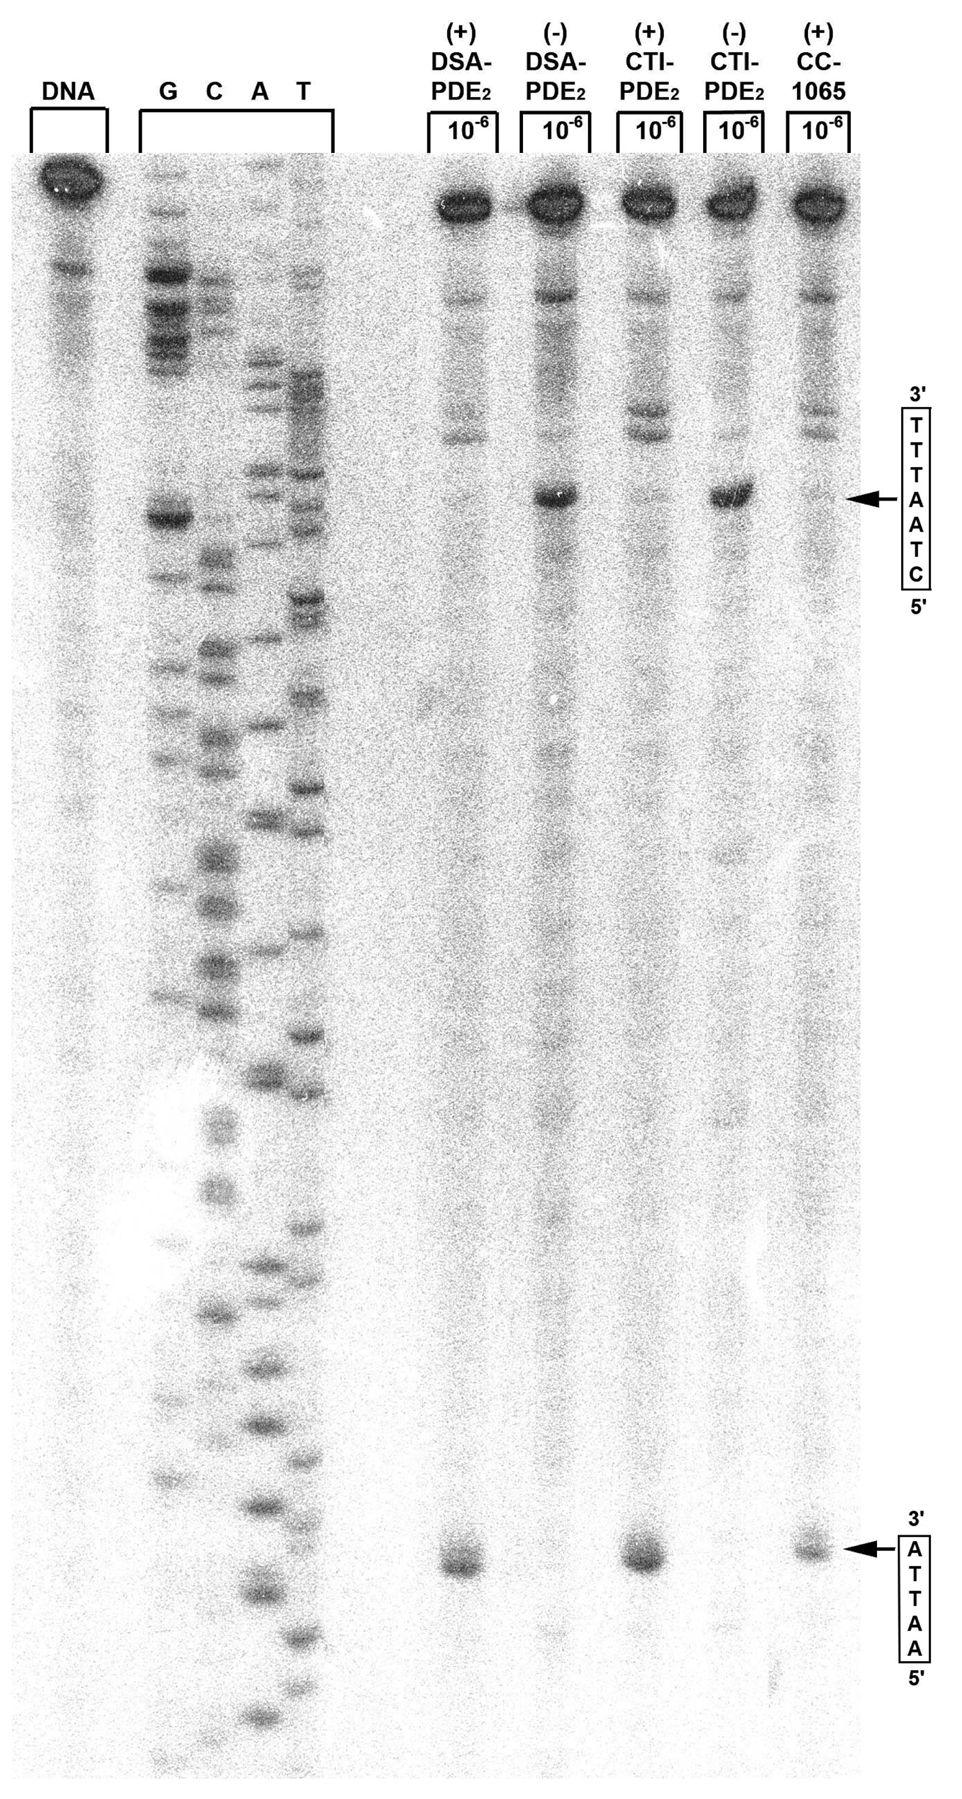 Tichenor et al. Page 19 NIH-PA Author Manuscript NIH-PA Author Manuscript NIH-PA Author Manuscript Figure 11. Thermally-induced strand cleavage of w794 DNA (144 bp, nucleotide no.